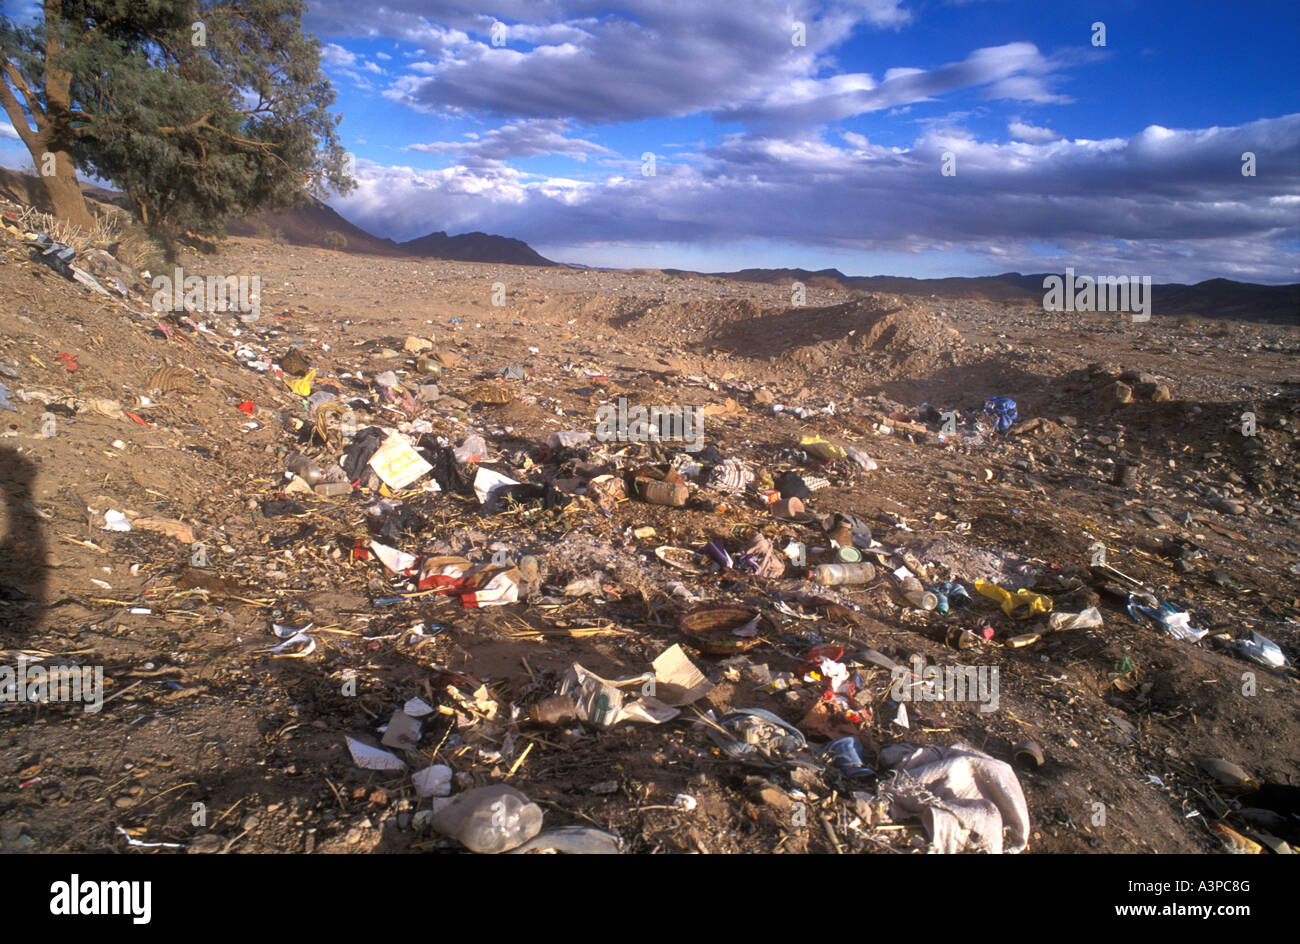 Litter dumped on the south edge of the town of Tinerhir Morocco Stock Photo